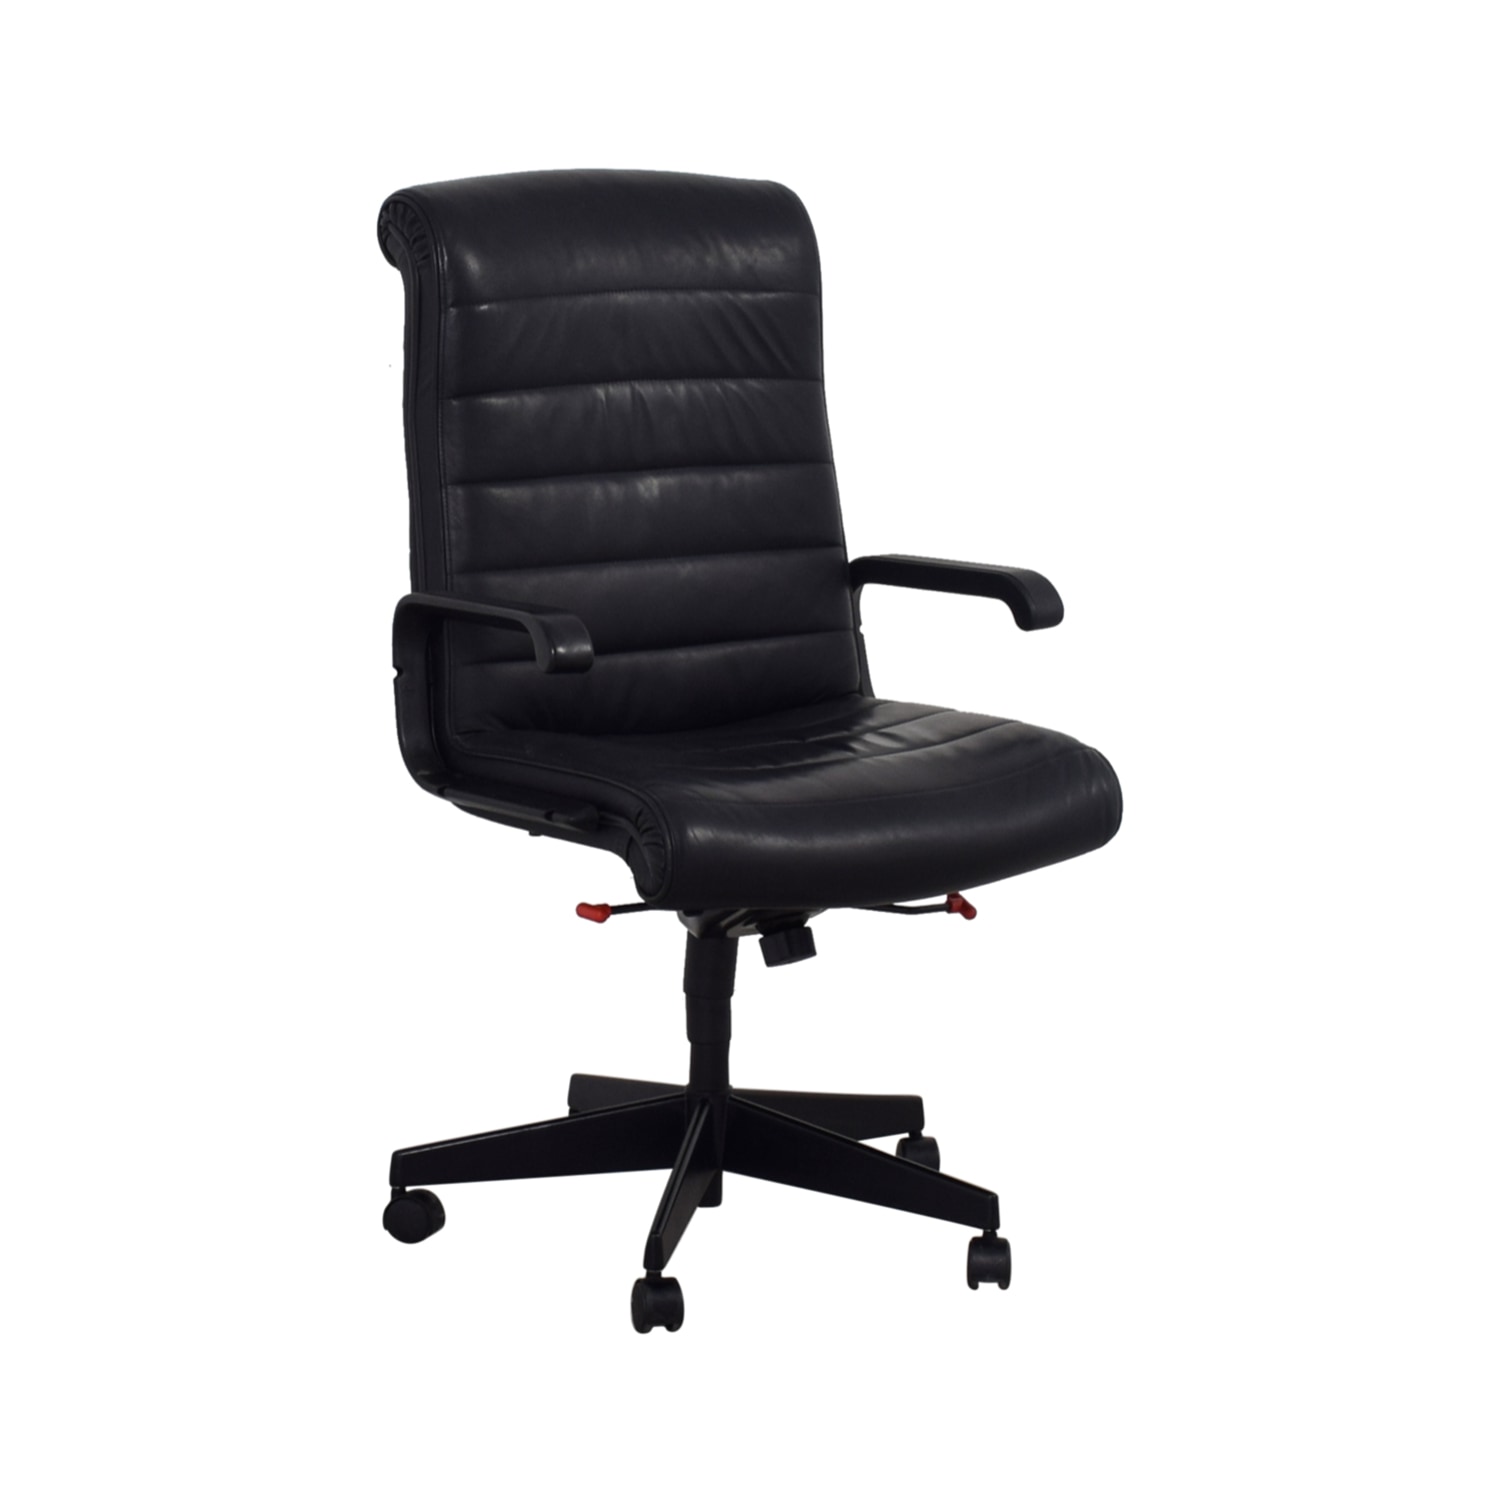  Black Leather Office Chair Chairs